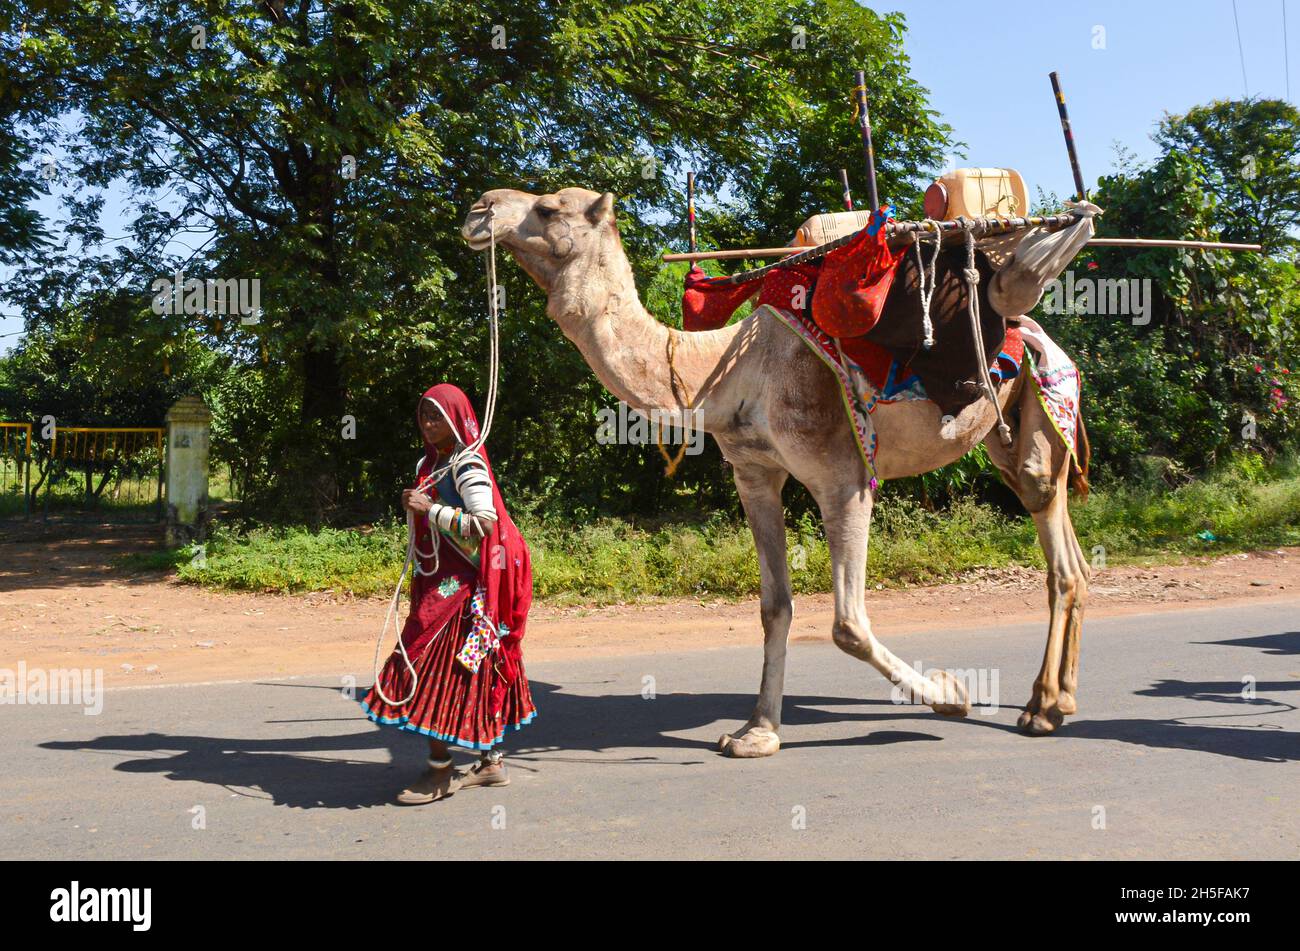 An Indian gypsy woman with her camel. Stock Photo